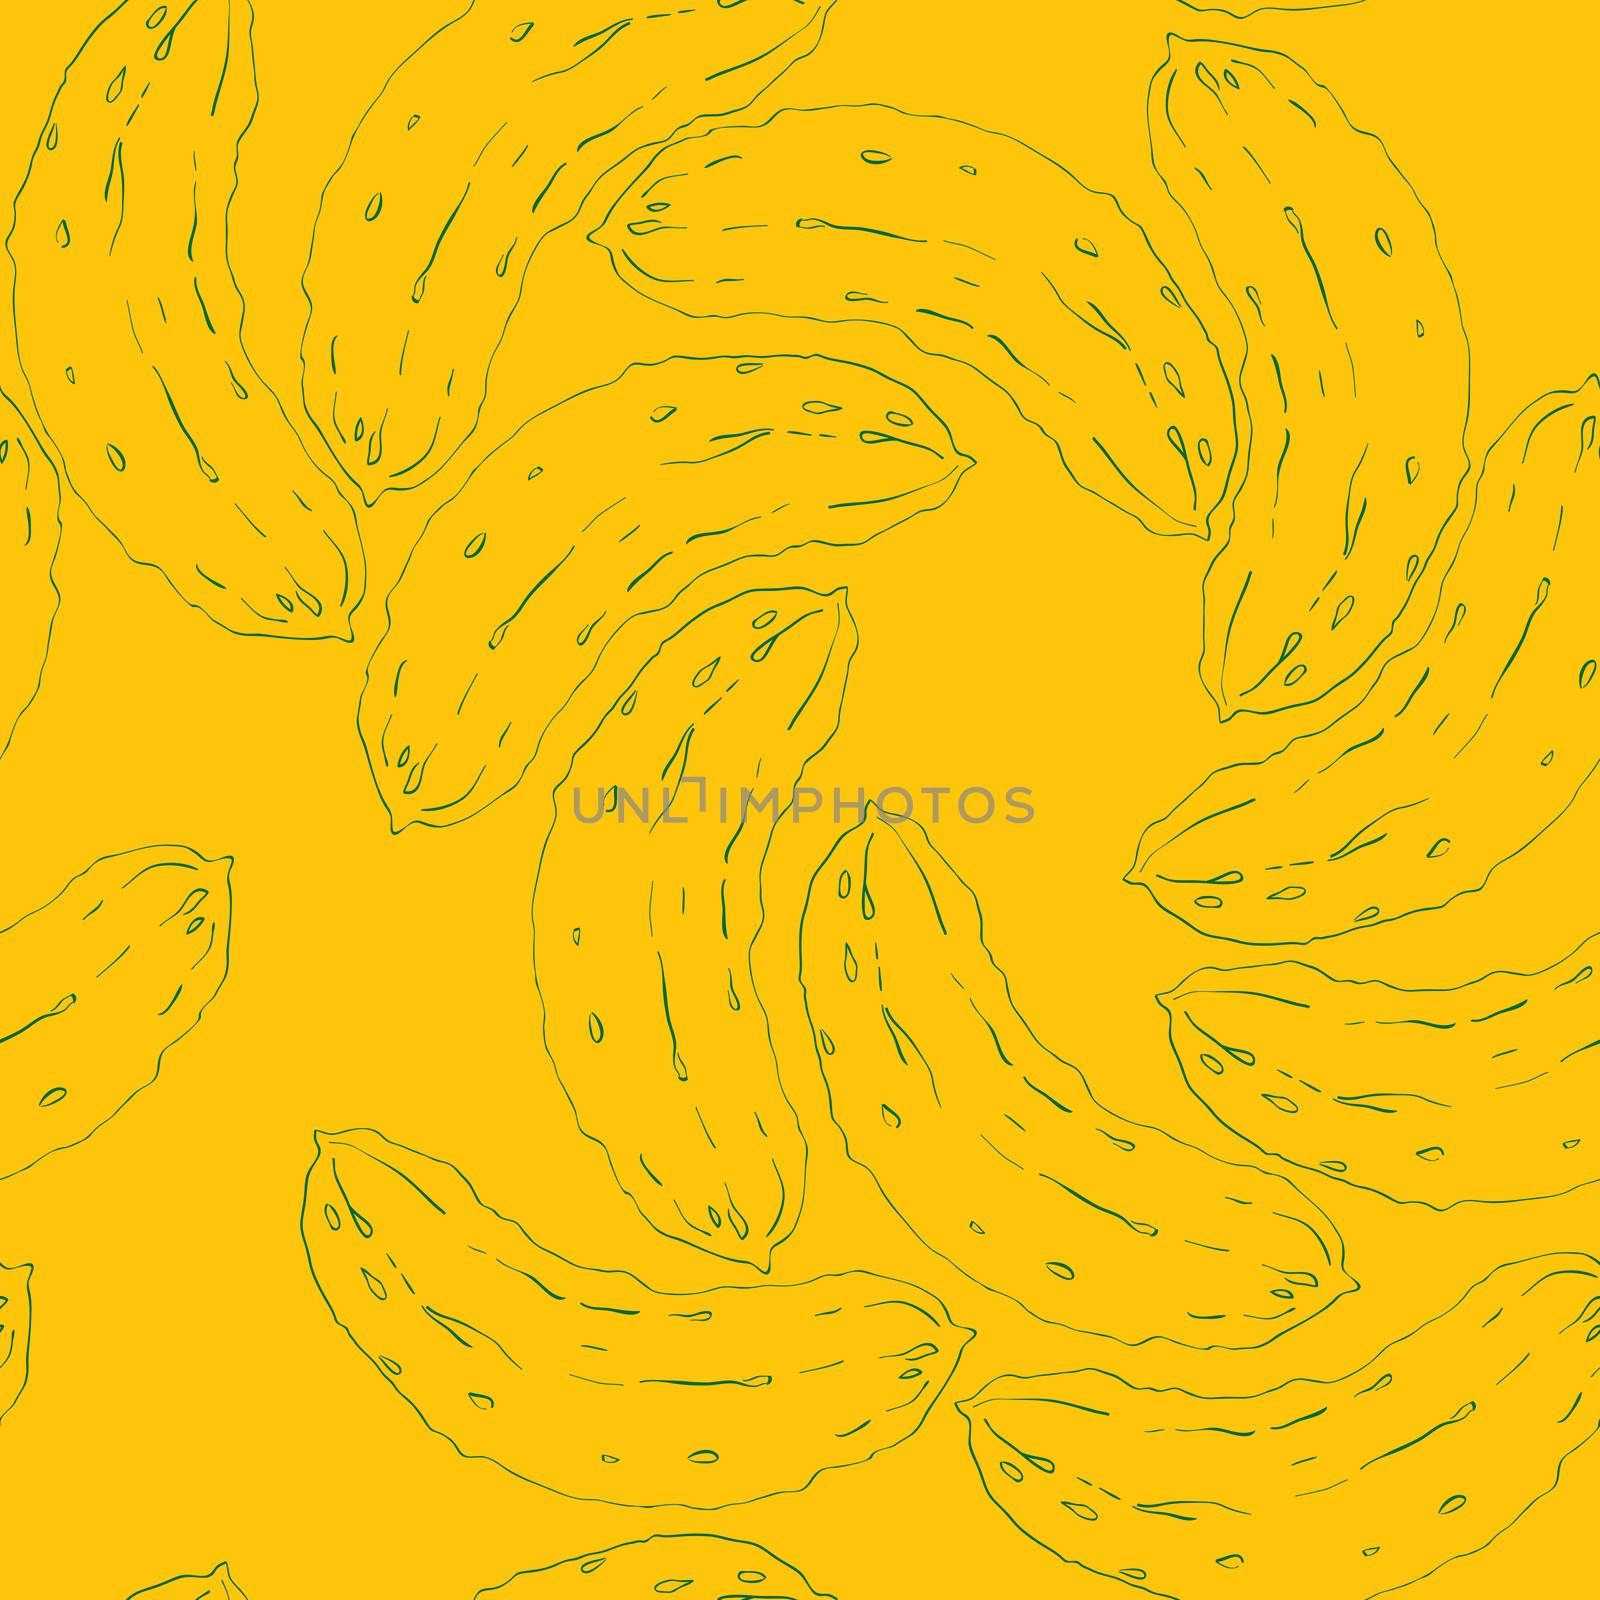 Seamless pattern with cucumbers in a spiral composition, doodle illustration over a dark yellow background